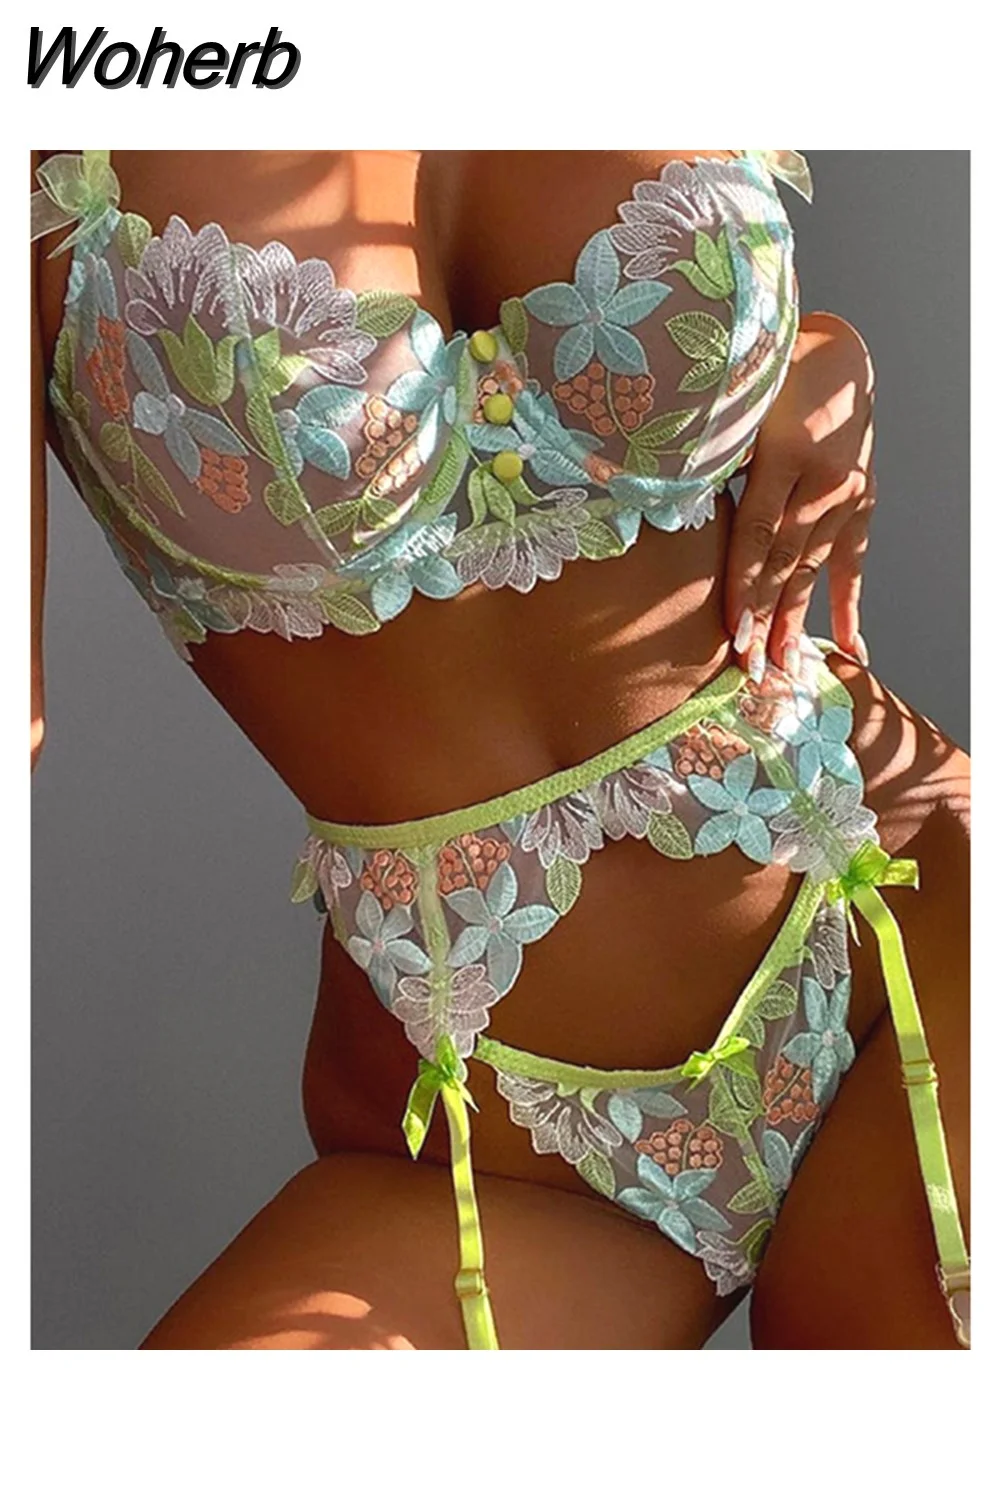 Woherb Green Romantic Lace Bra And Panty Galter Lingerie Set 715-1